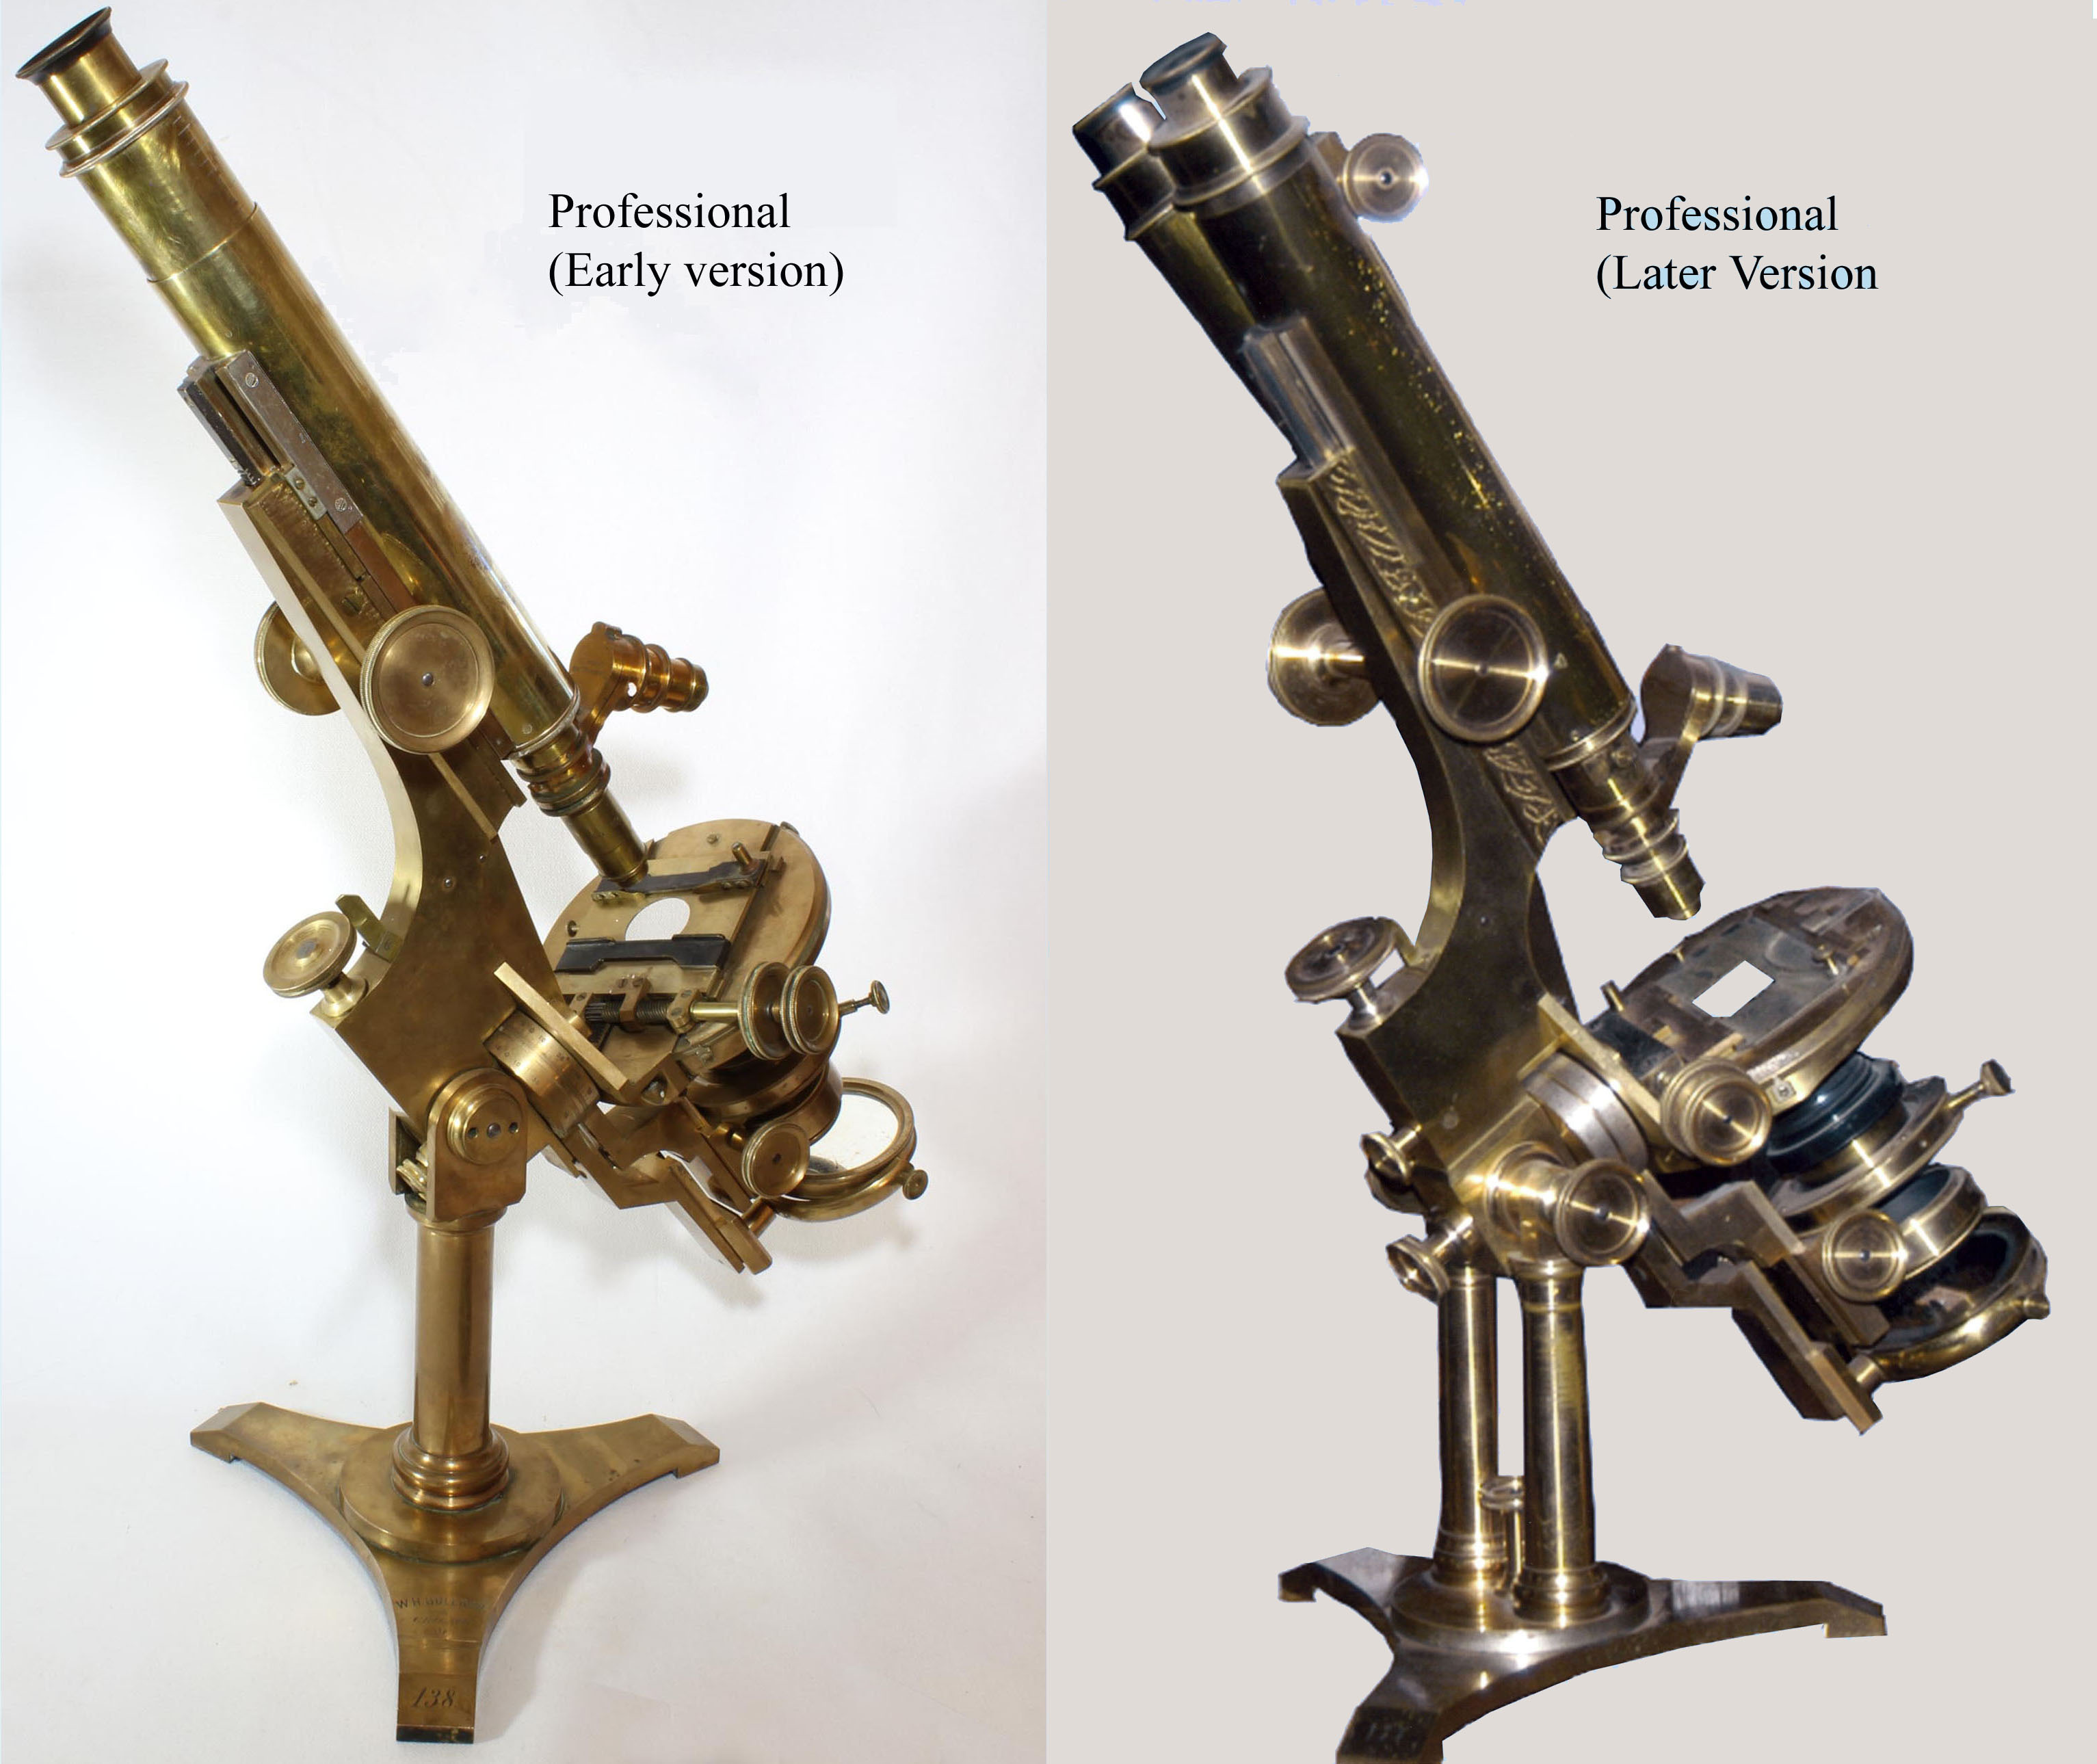 Professional Compound Microscope: Early and Late Versions